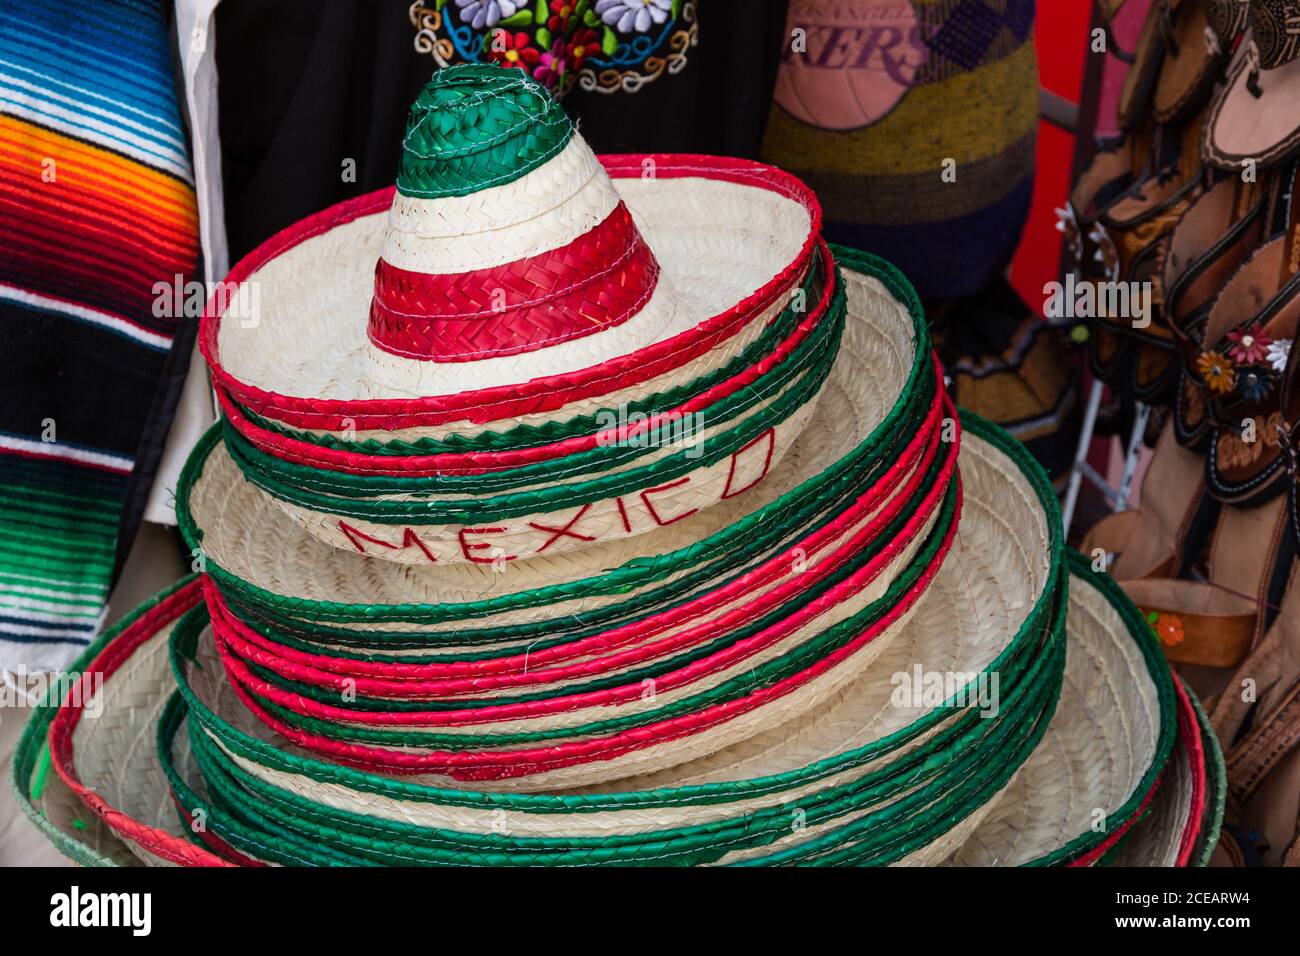 A stack of Mexican sombreros for sale in a tourist shop in Tijuana, Mexico  Stock Photo - Alamy